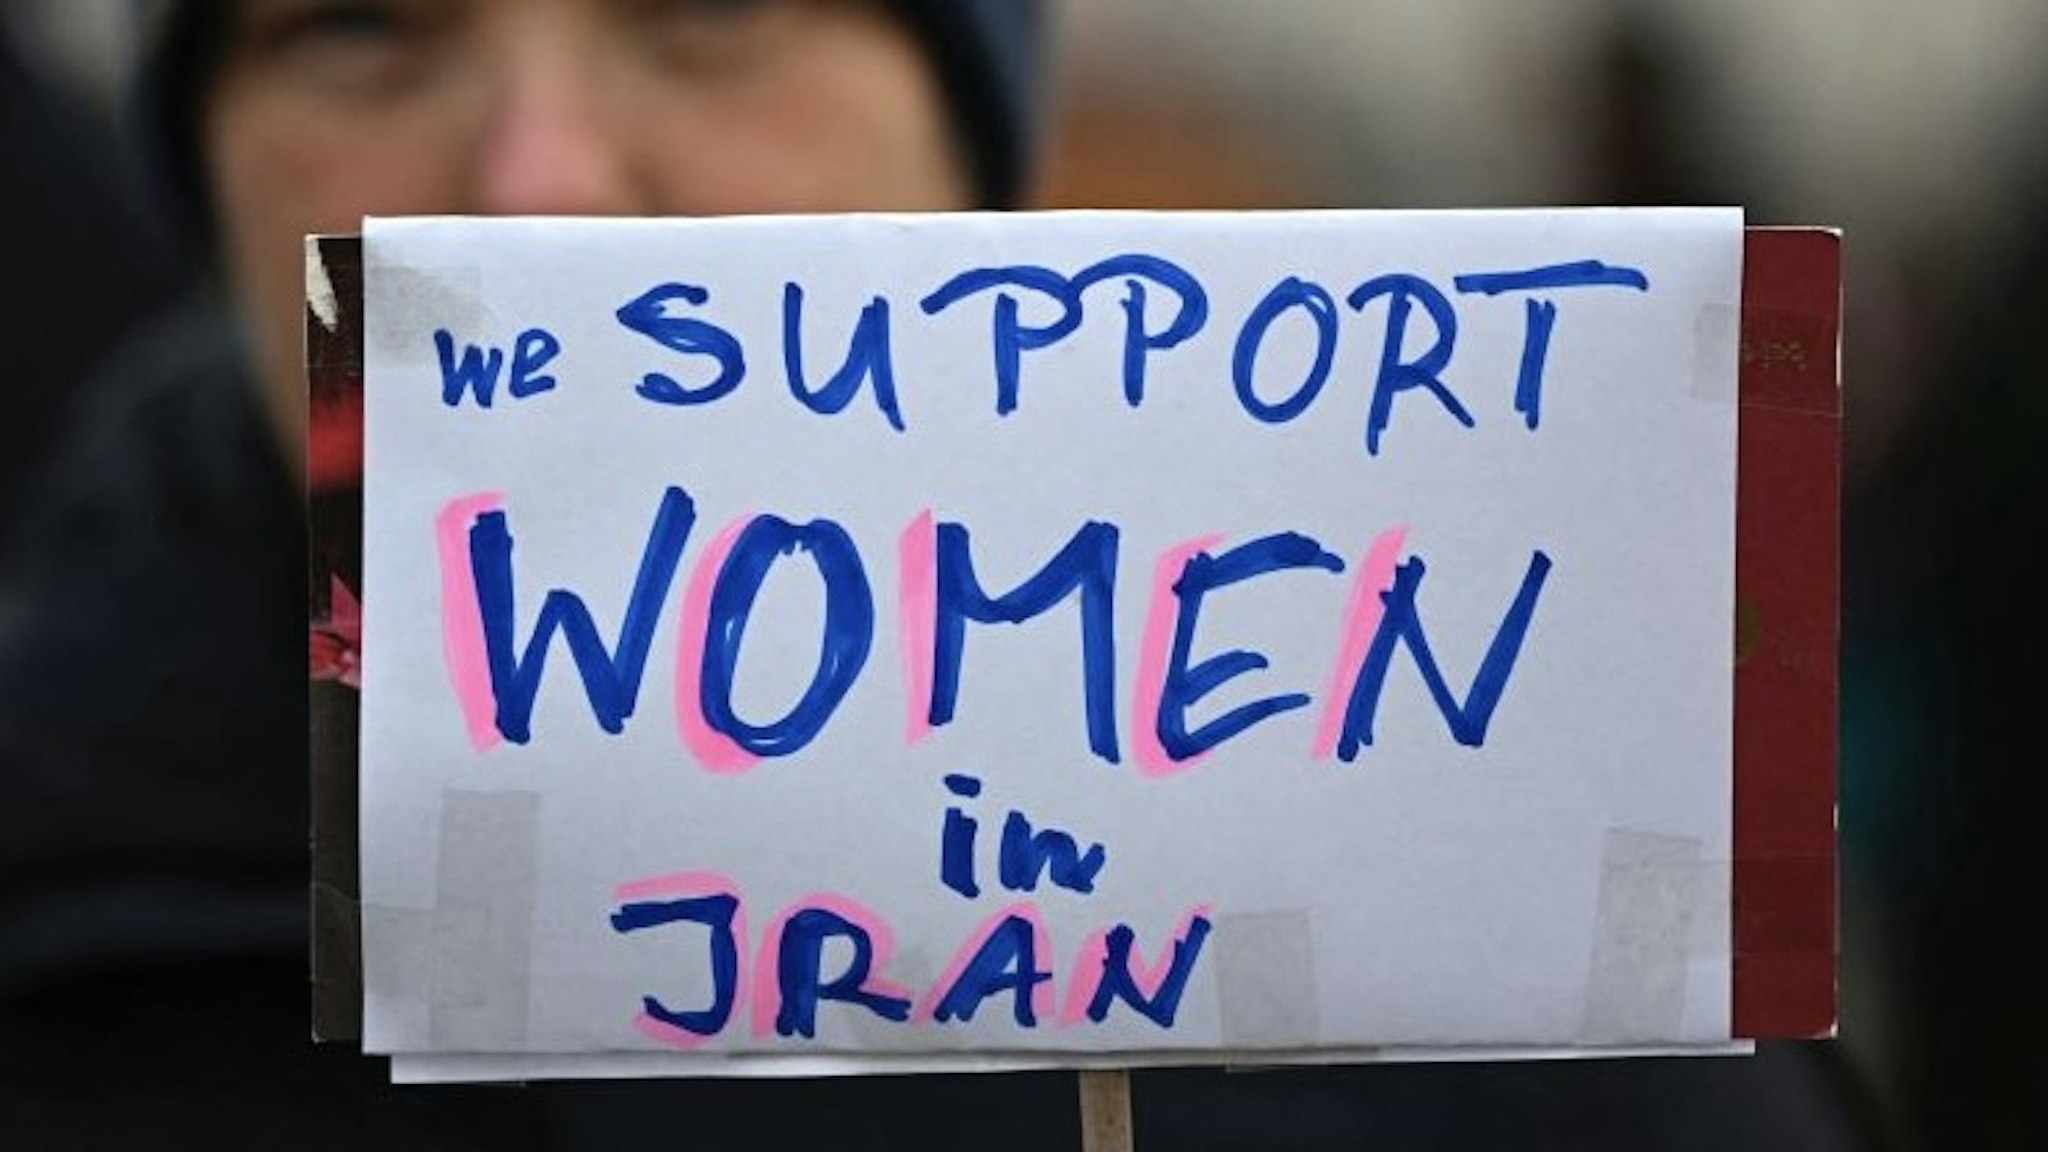 GERMANY-IRAN-DEMONSTRATION-WOMEN A protester holds a placard reading "We support women in Iran" during a womens march in solidarity with demonstrators in Iran in Berlin, on December 10, 2022. (Photo by Tobias Schwarz / AFP) (Photo by TOBIAS SCHWARZ/AFP via Getty Images) TOBIAS SCHWARZ / Contributor